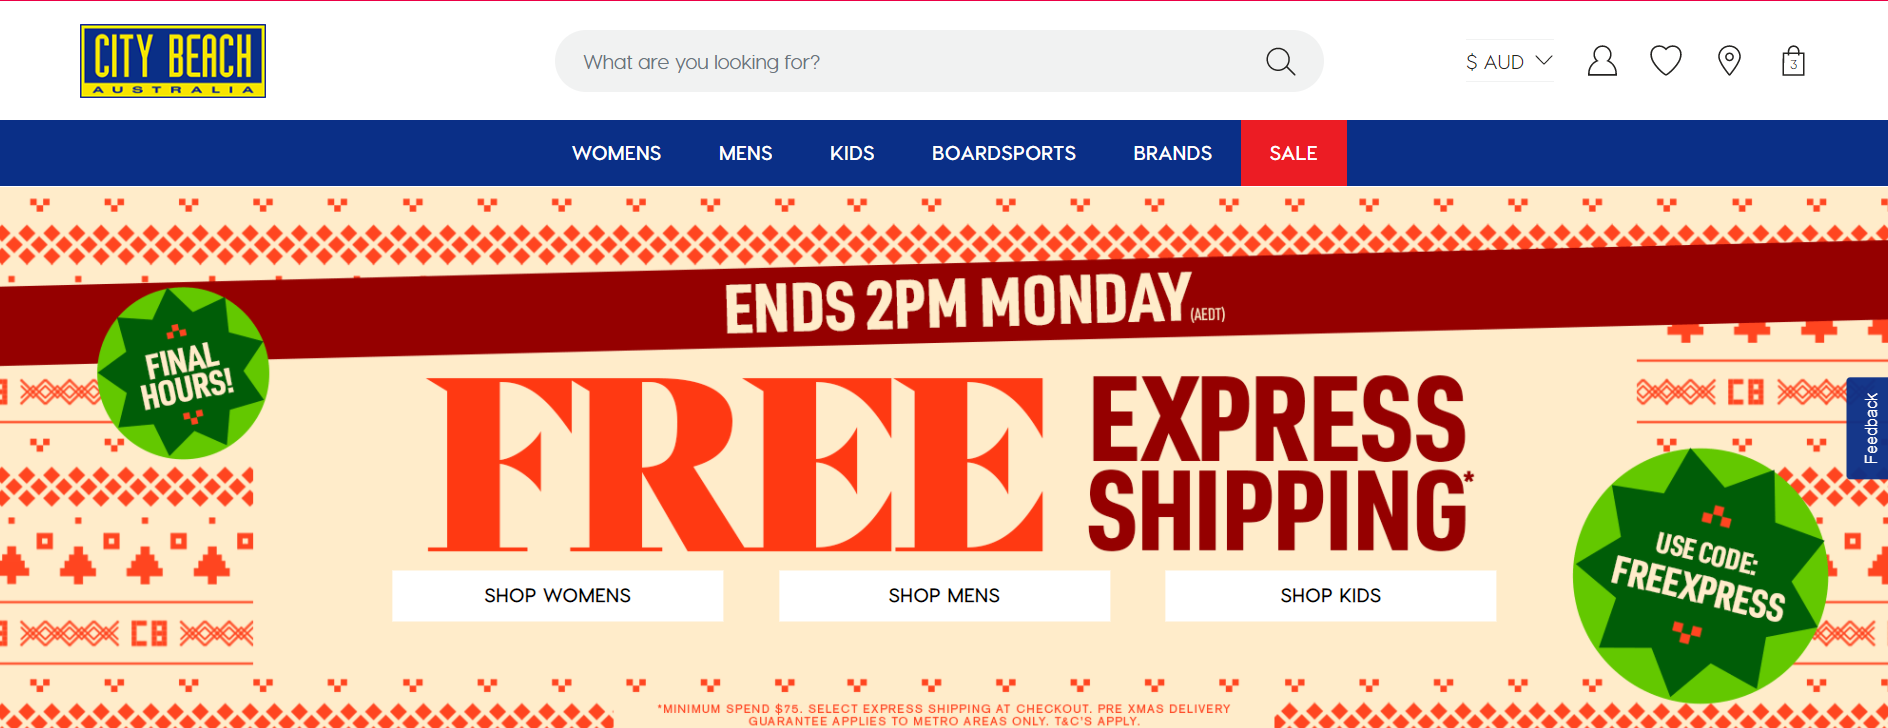 Free Express shipping for all orders over $75 with City Beach promo code